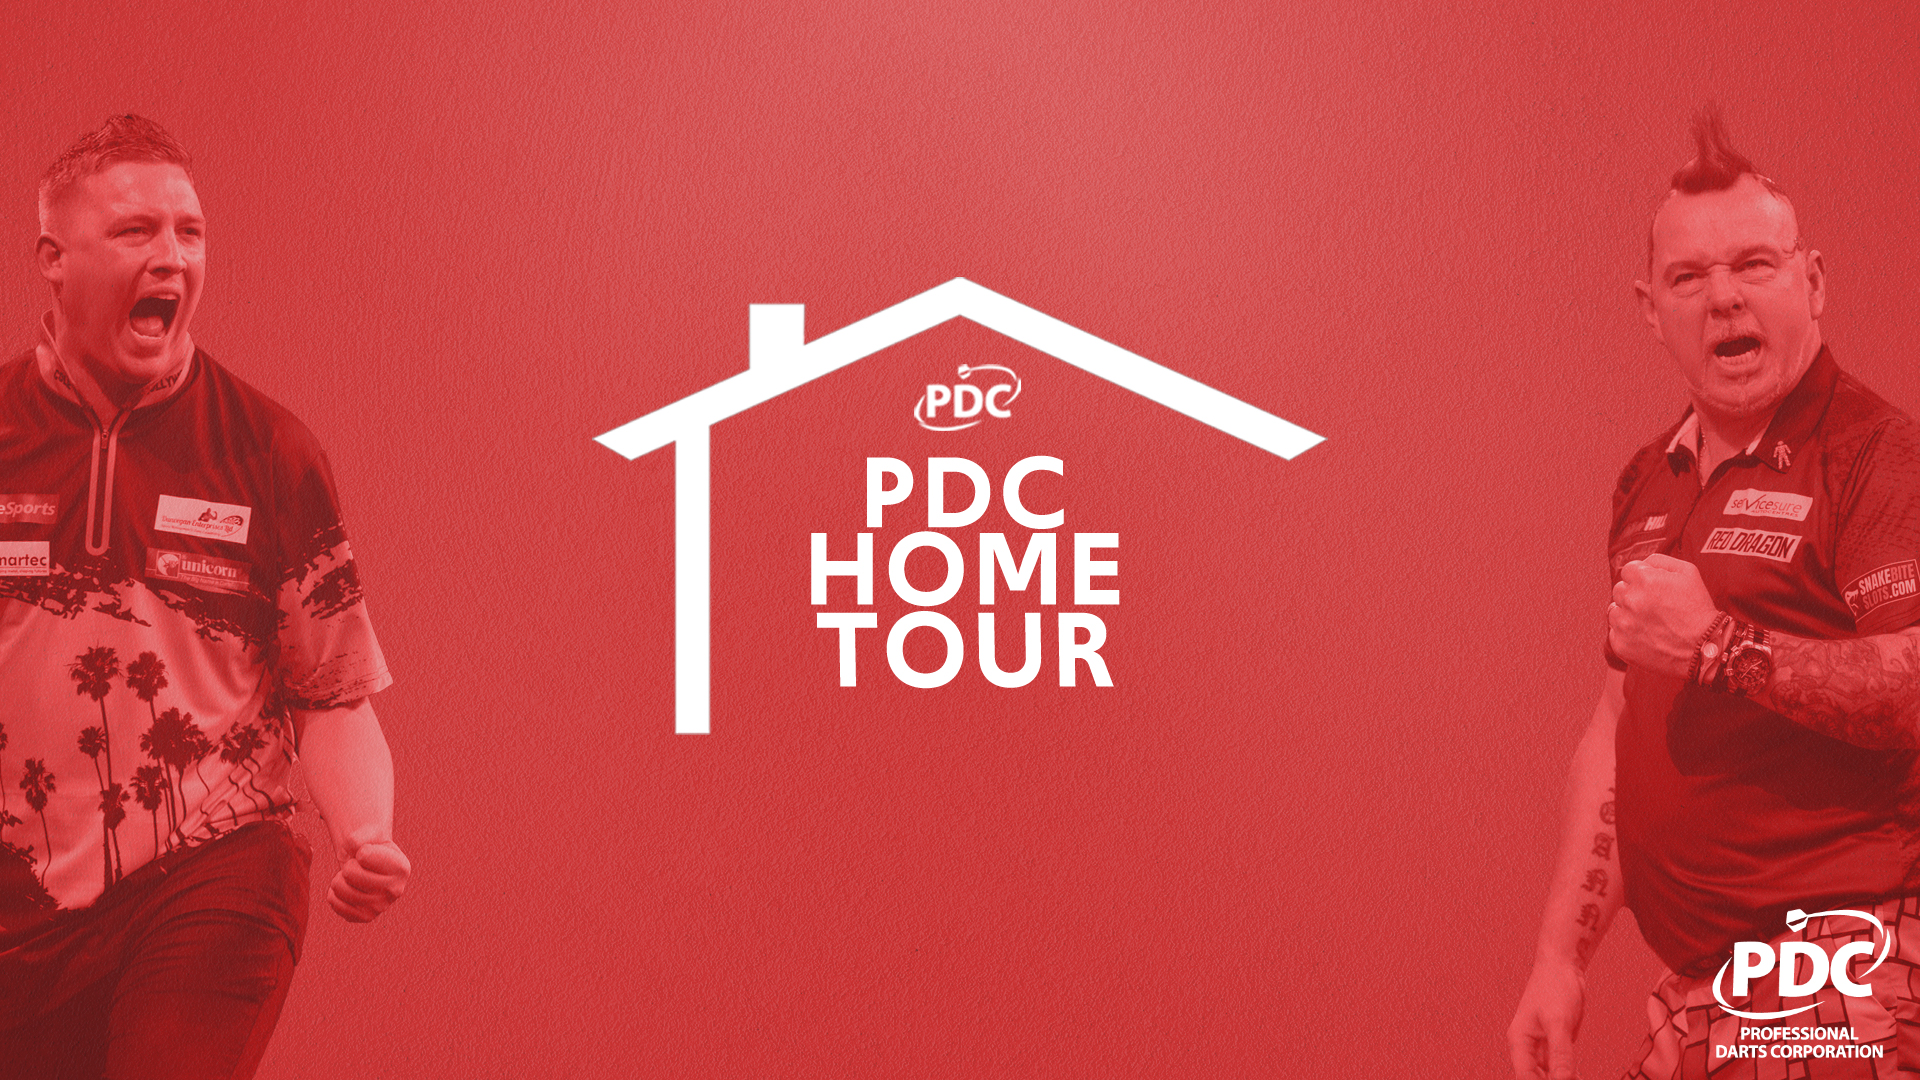 PDC Home Tour to launch on Friday | PDC